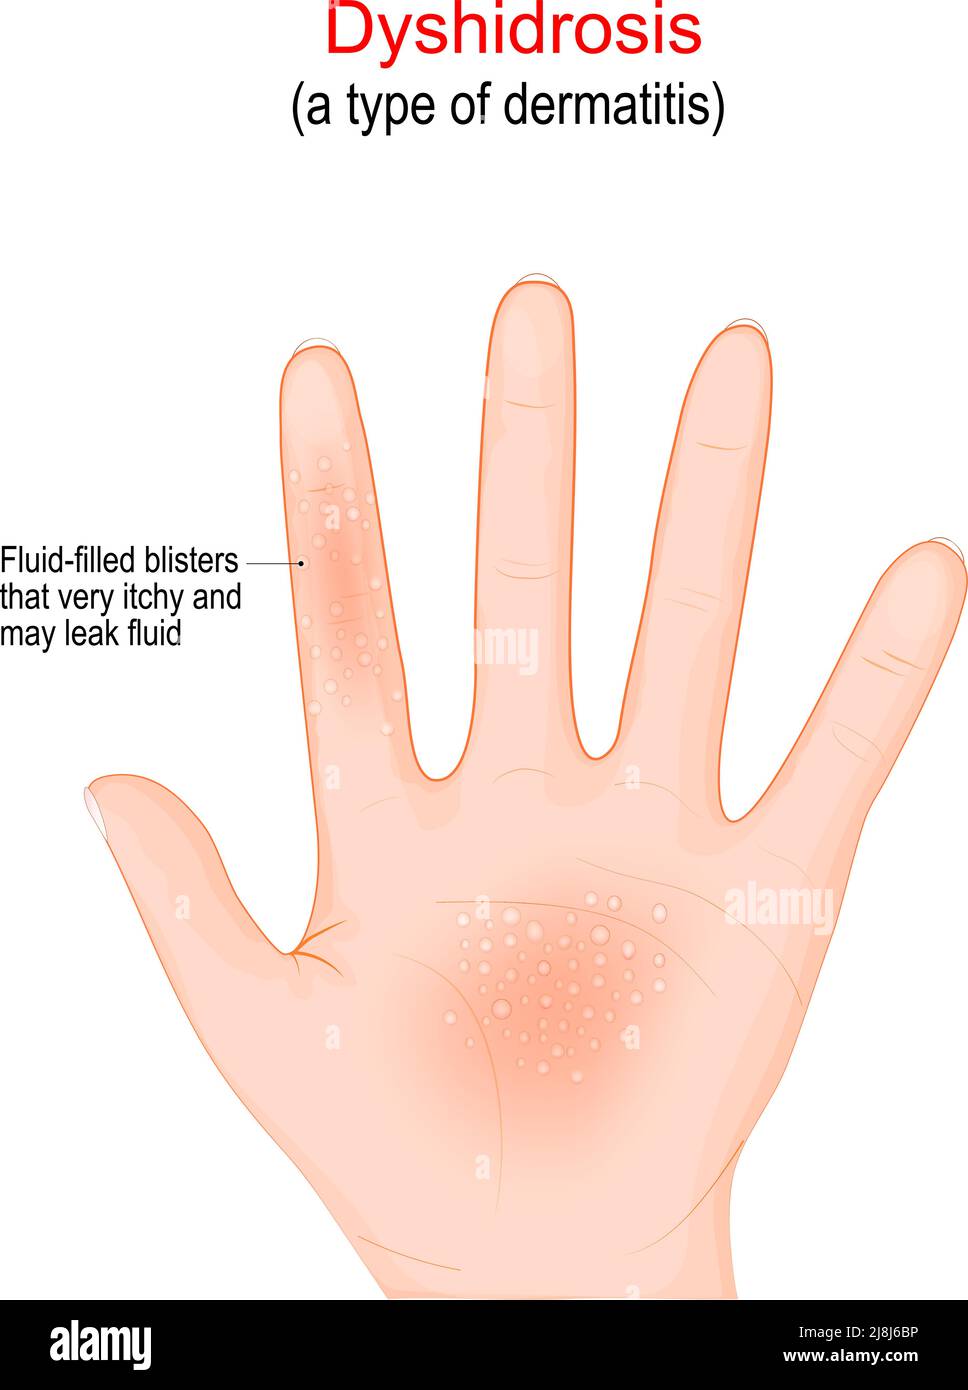 Dyshidrosis. type of dermatitis with itchy blisters on the palms of the hands. Fluid-filled blisters very itchy. Vector illustration Stock Vector